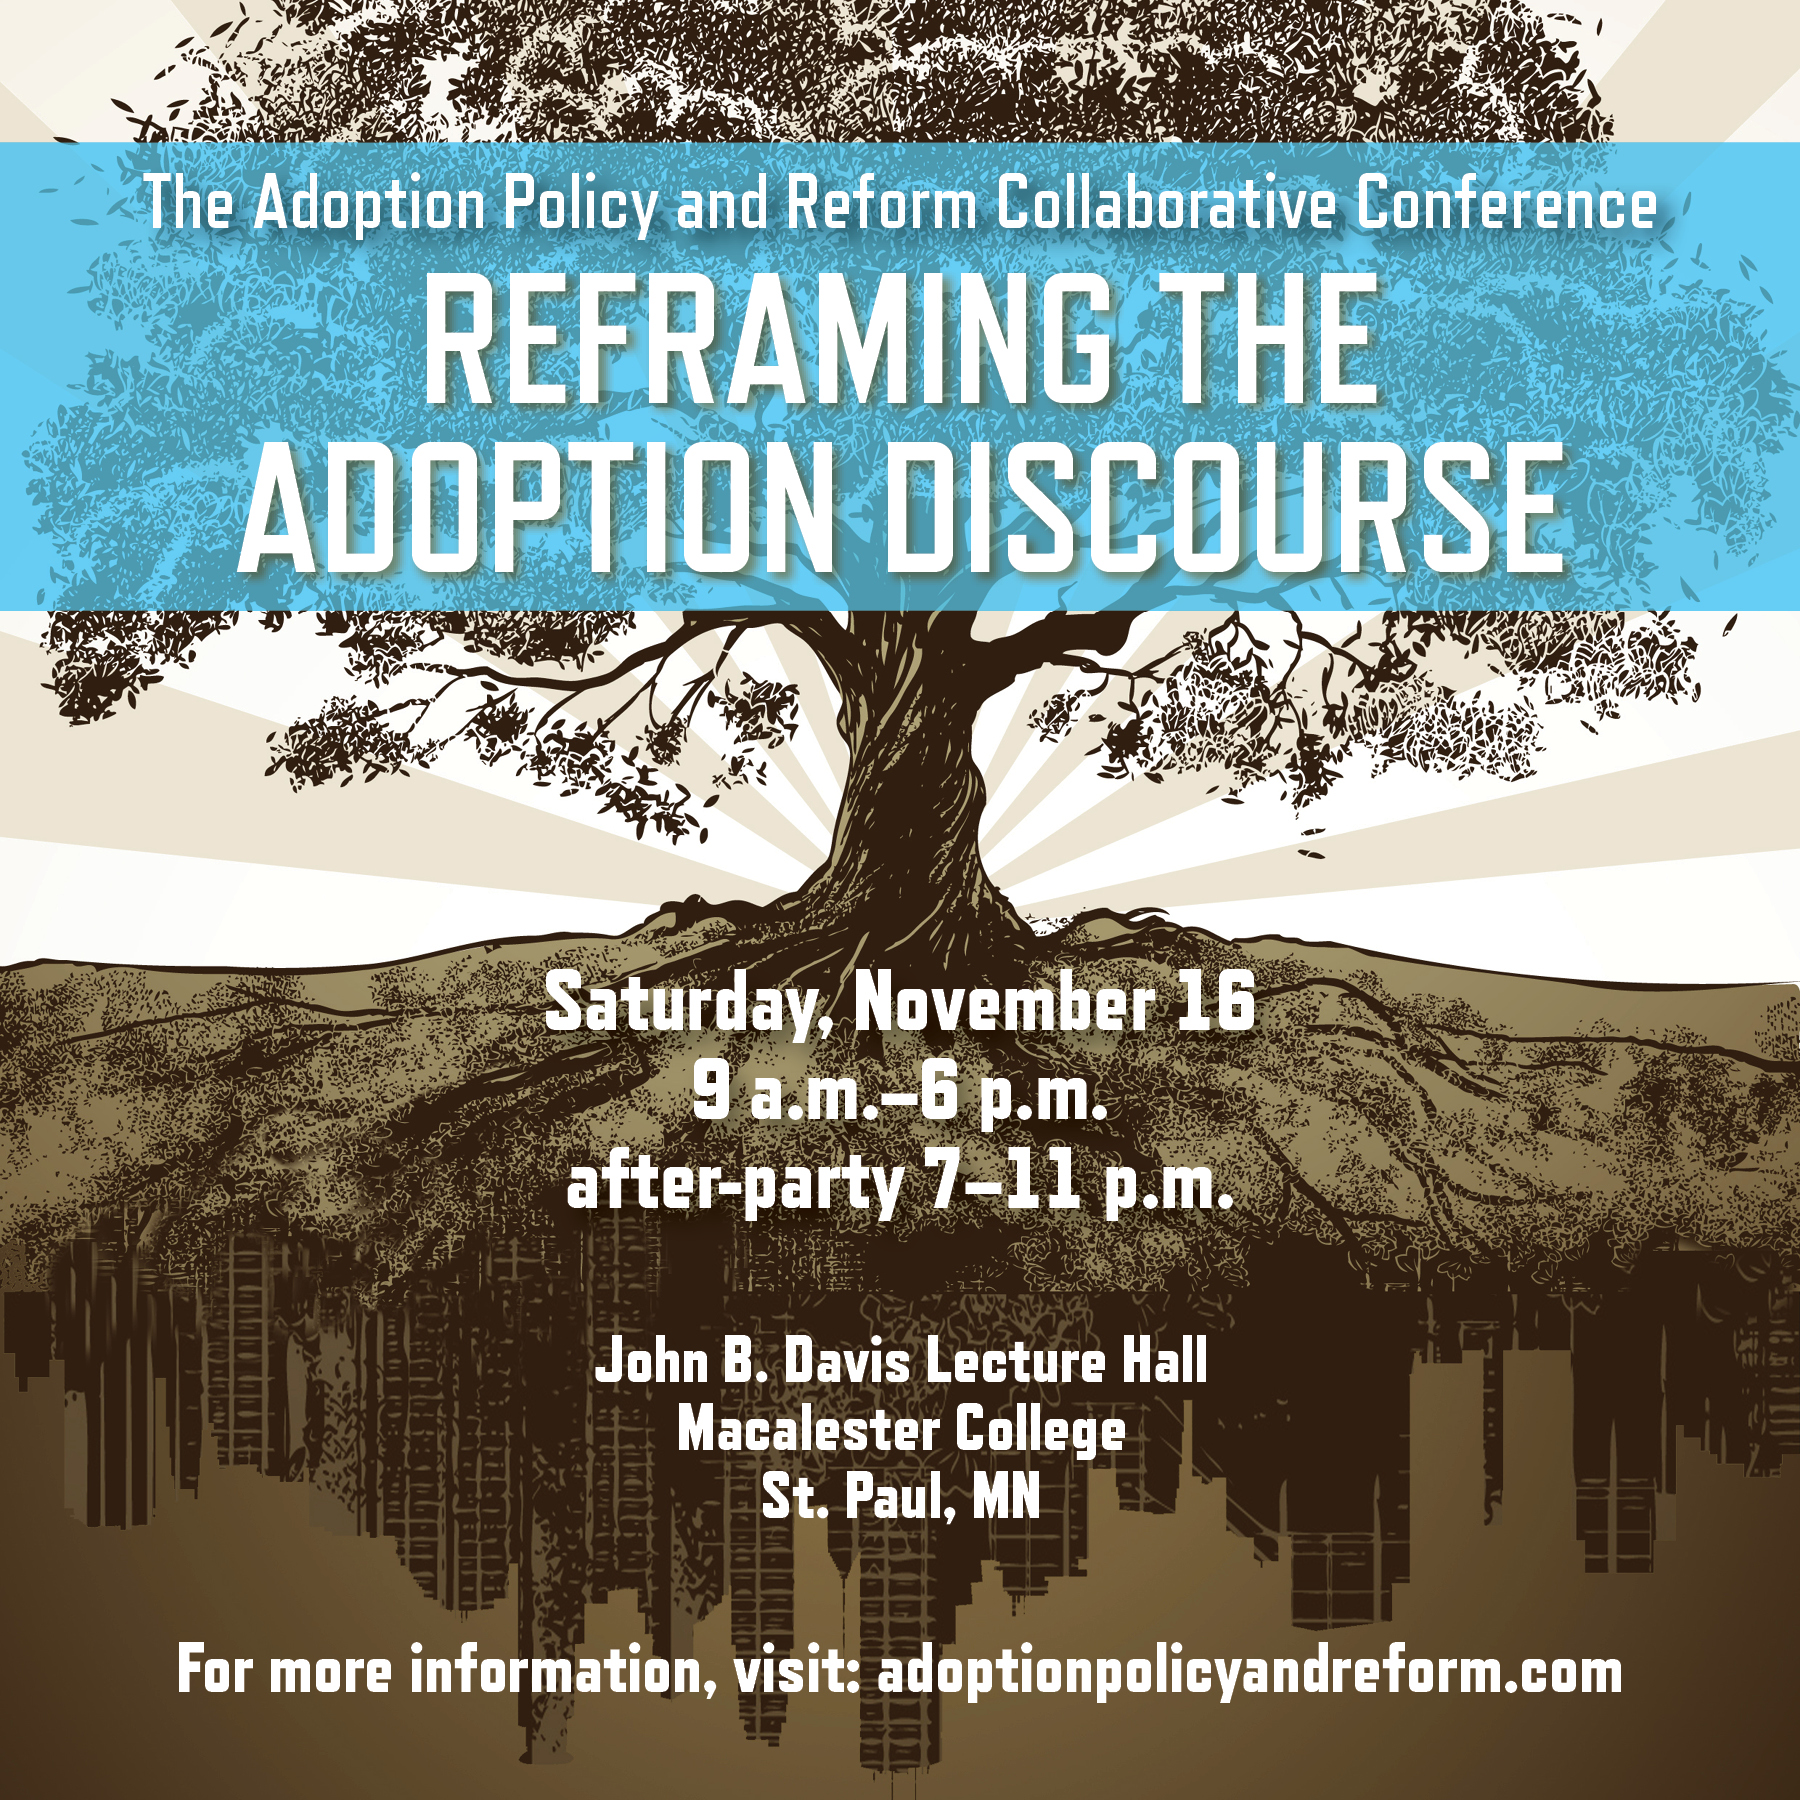 "Reframing the Adoption Discourse" Conference in St Paul, MN Saturday November 16th, 21013